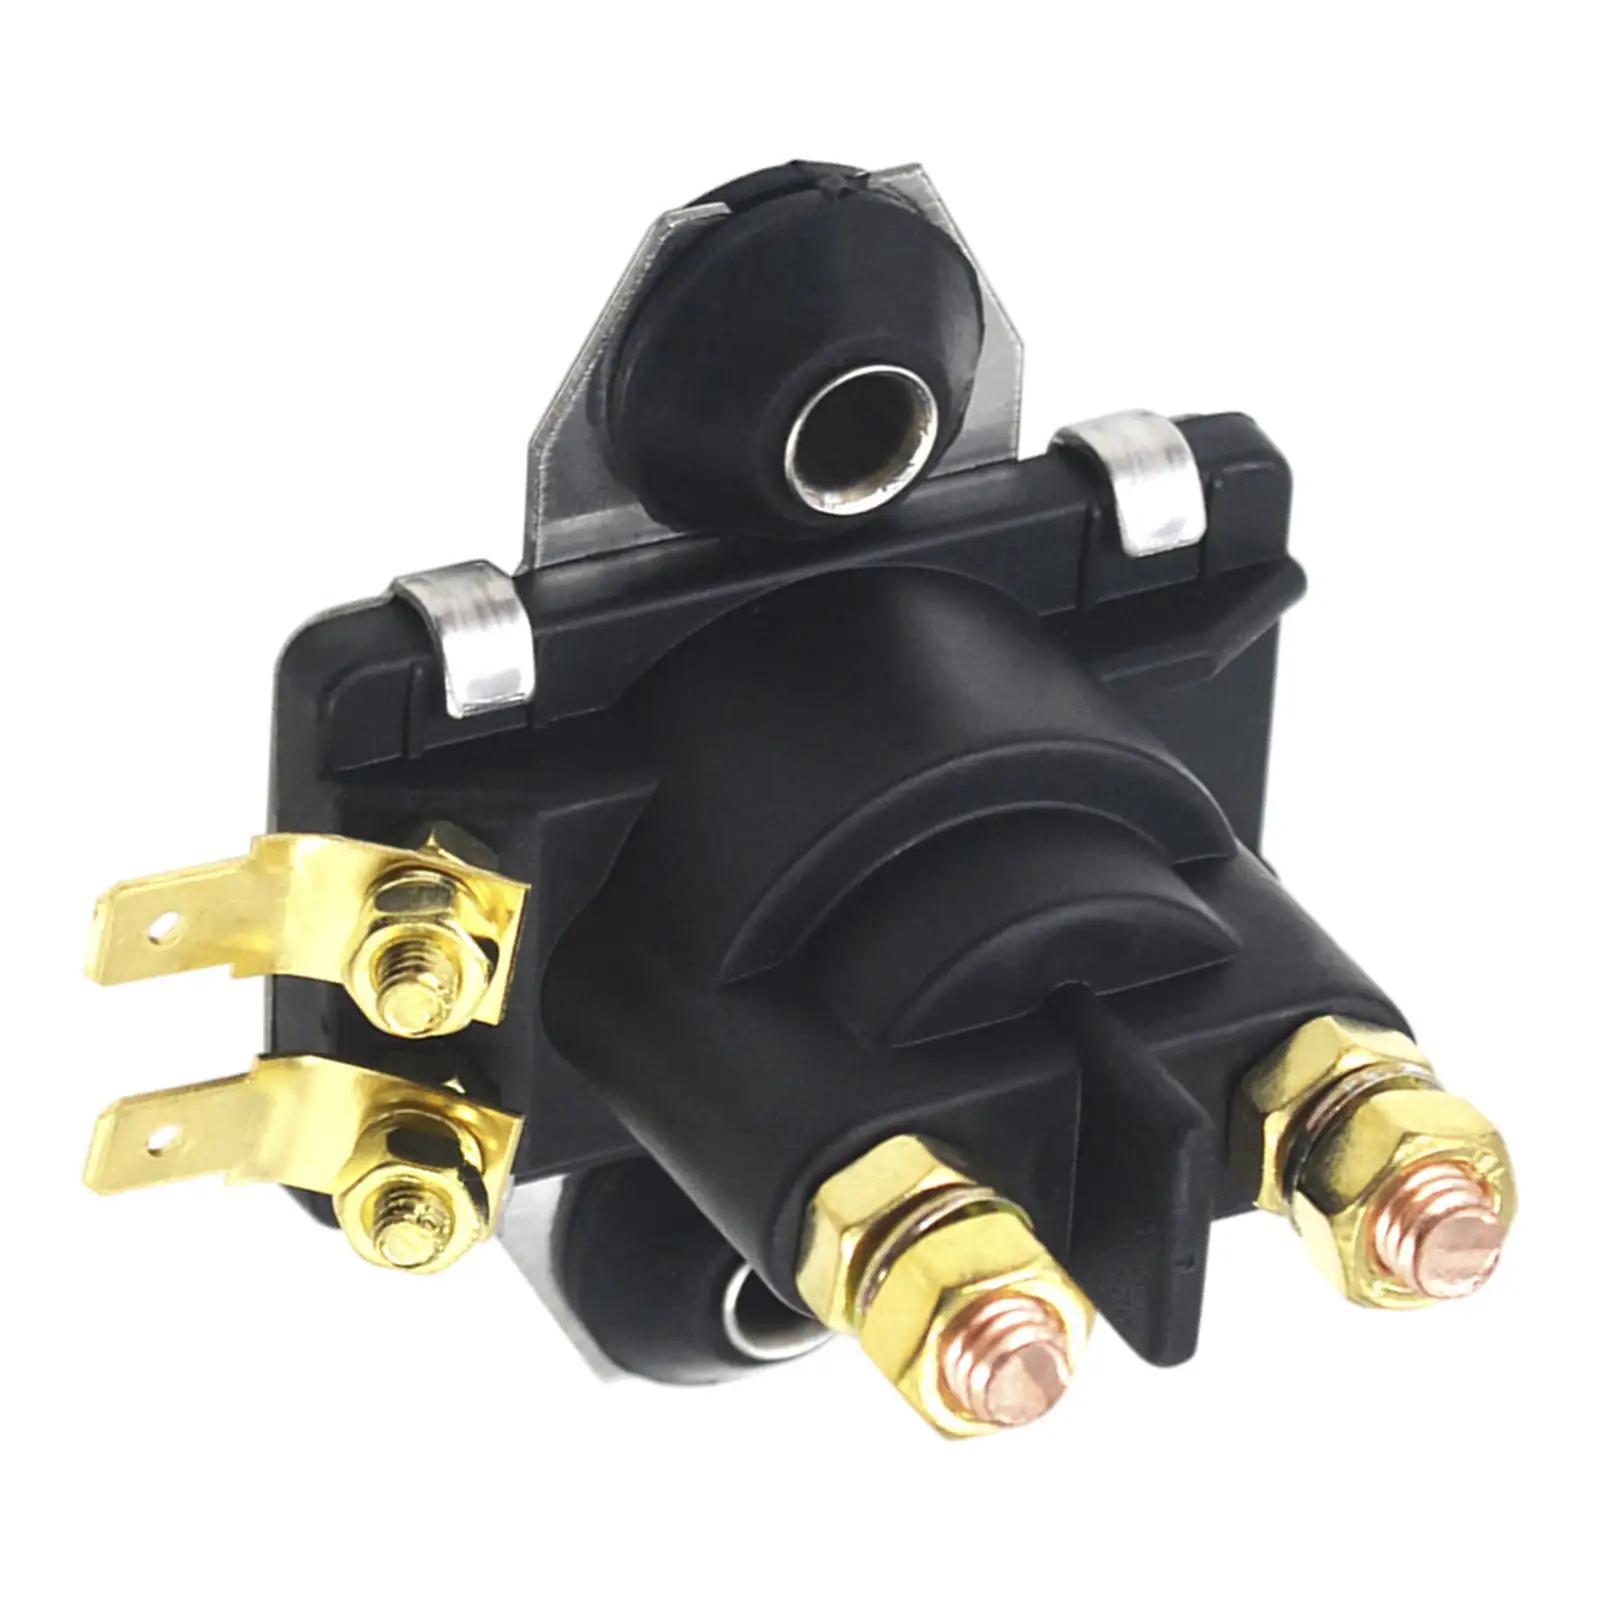 Motorcycle Starter Relay 65W-81941-00-00 89-818997A1 Starter Solenoid Fit for 20HP 25HP 70HP 80HP 90HP 89850187T1 89-850187T1 images - 6